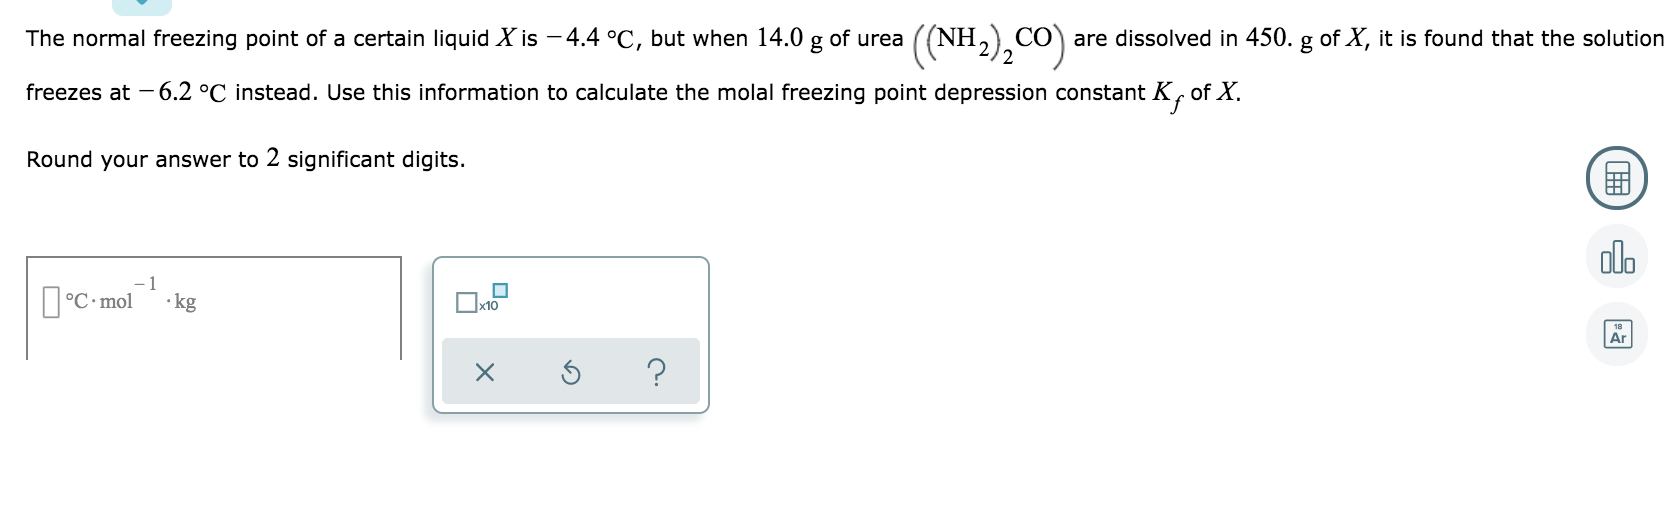 Answered Nh Co The Normal Freezing Point Of Bartleby